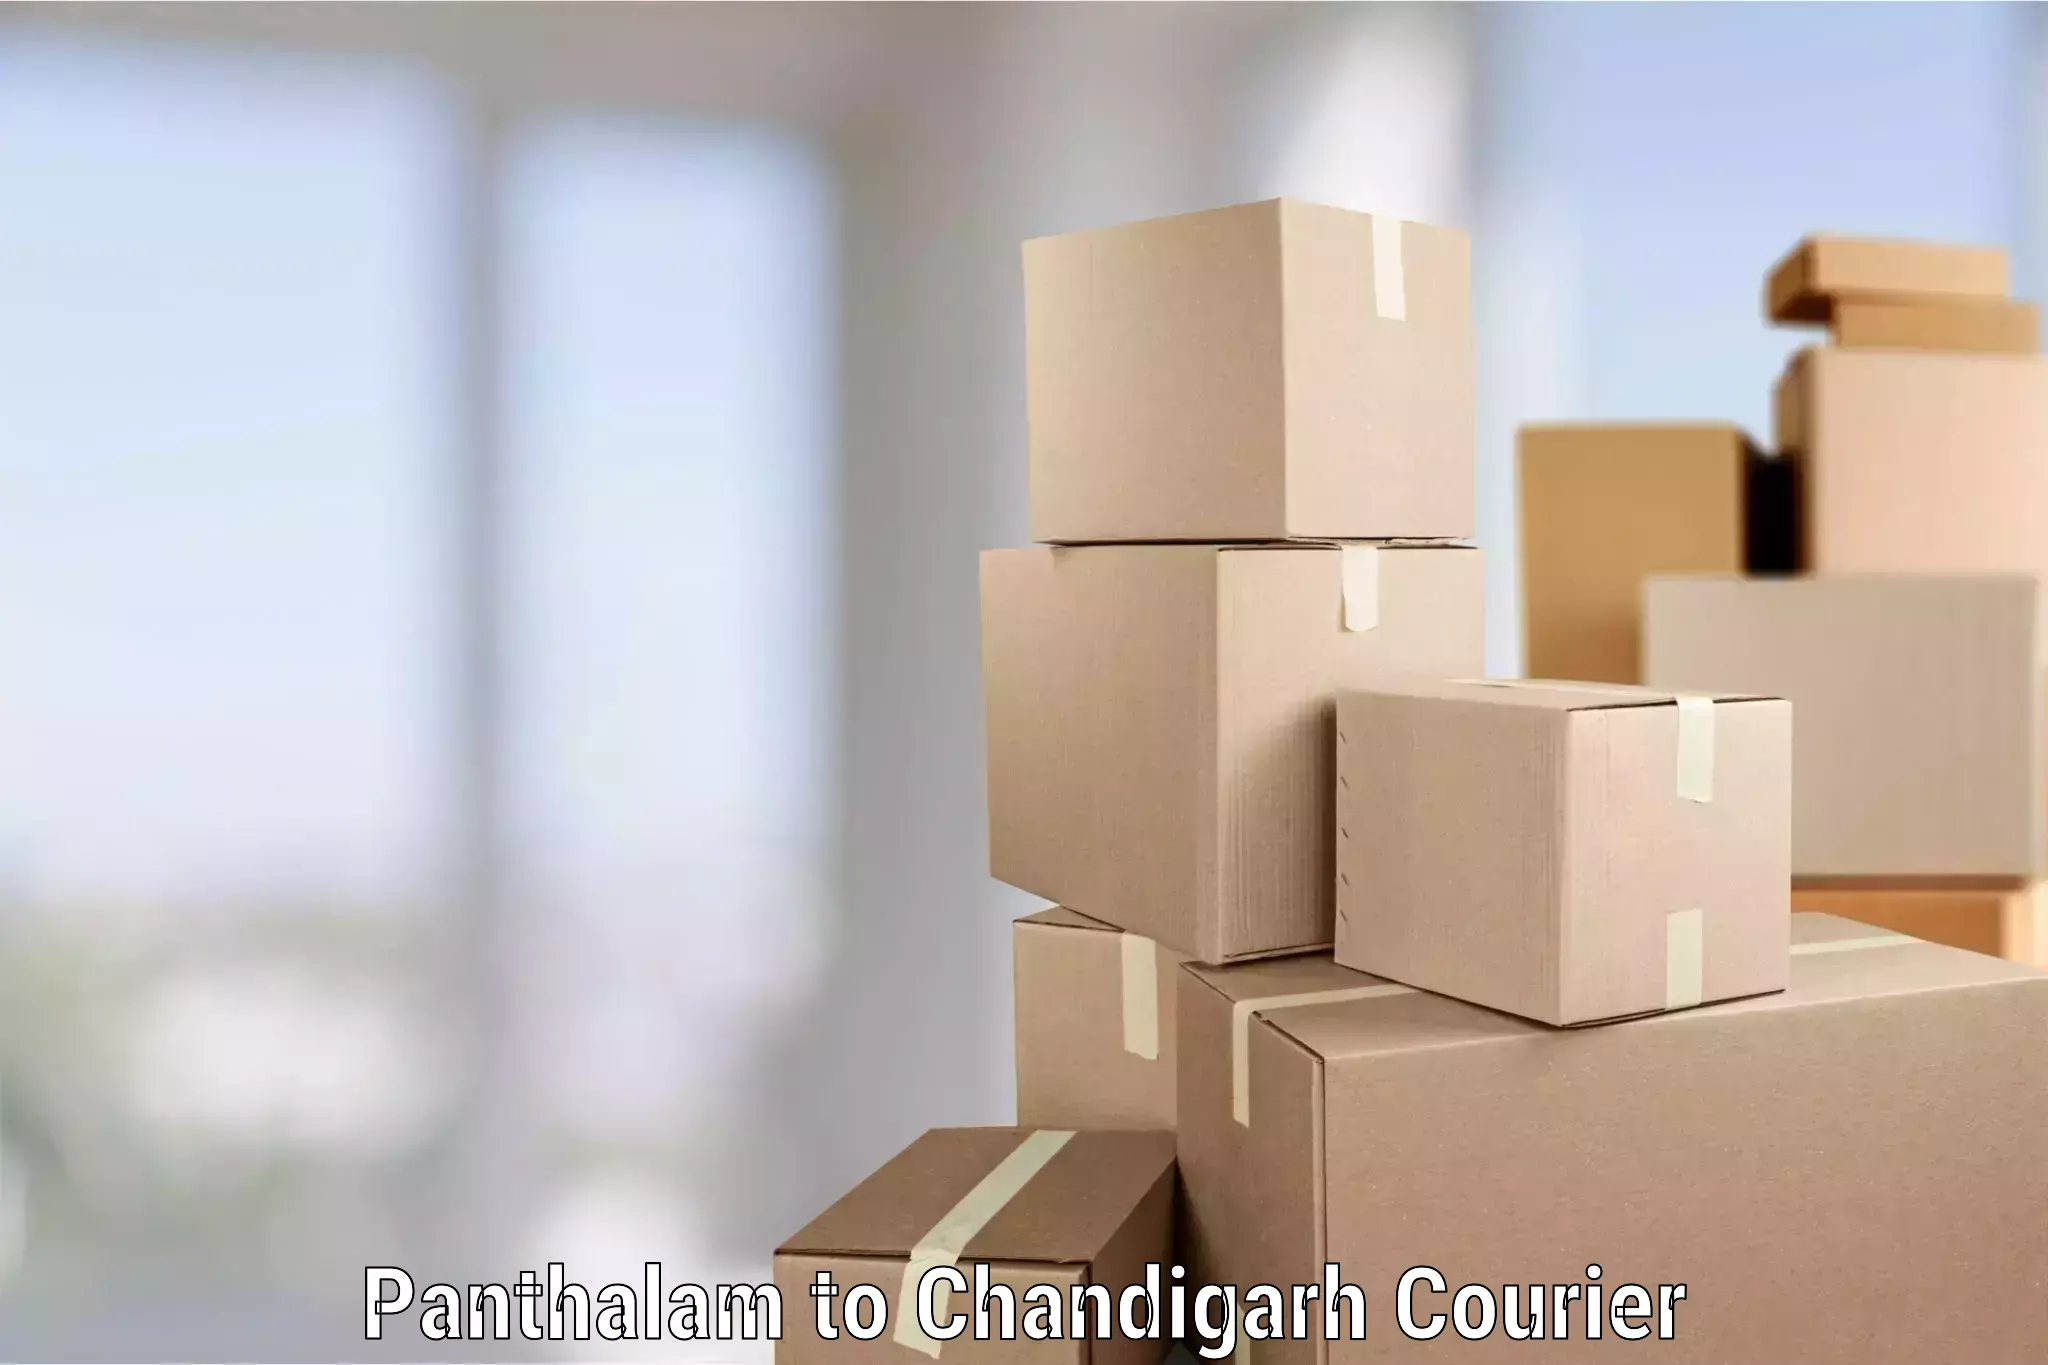 Furniture delivery service Panthalam to Chandigarh